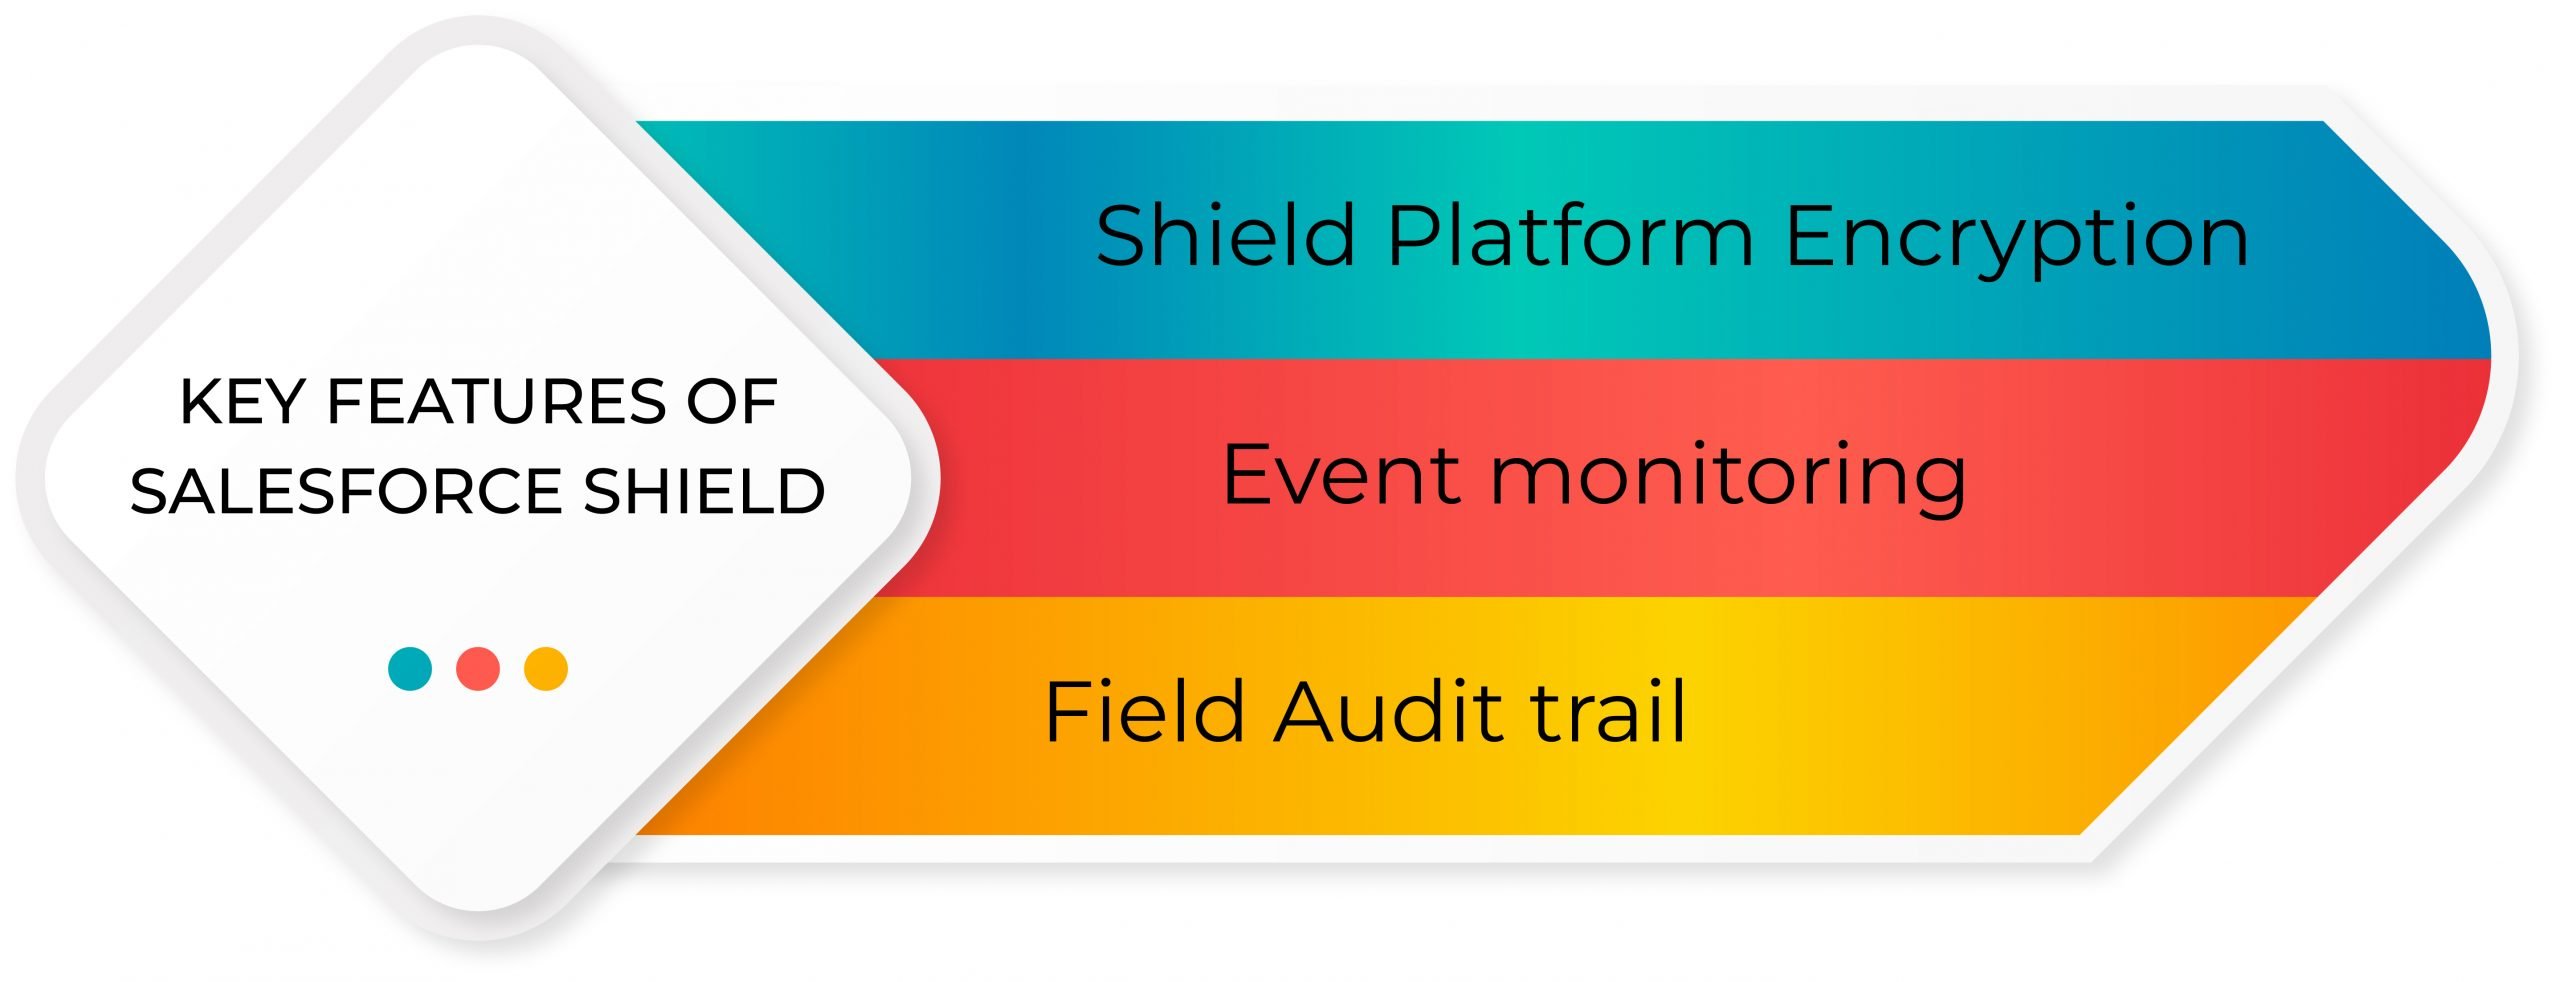 Key features of Salesforce Shield